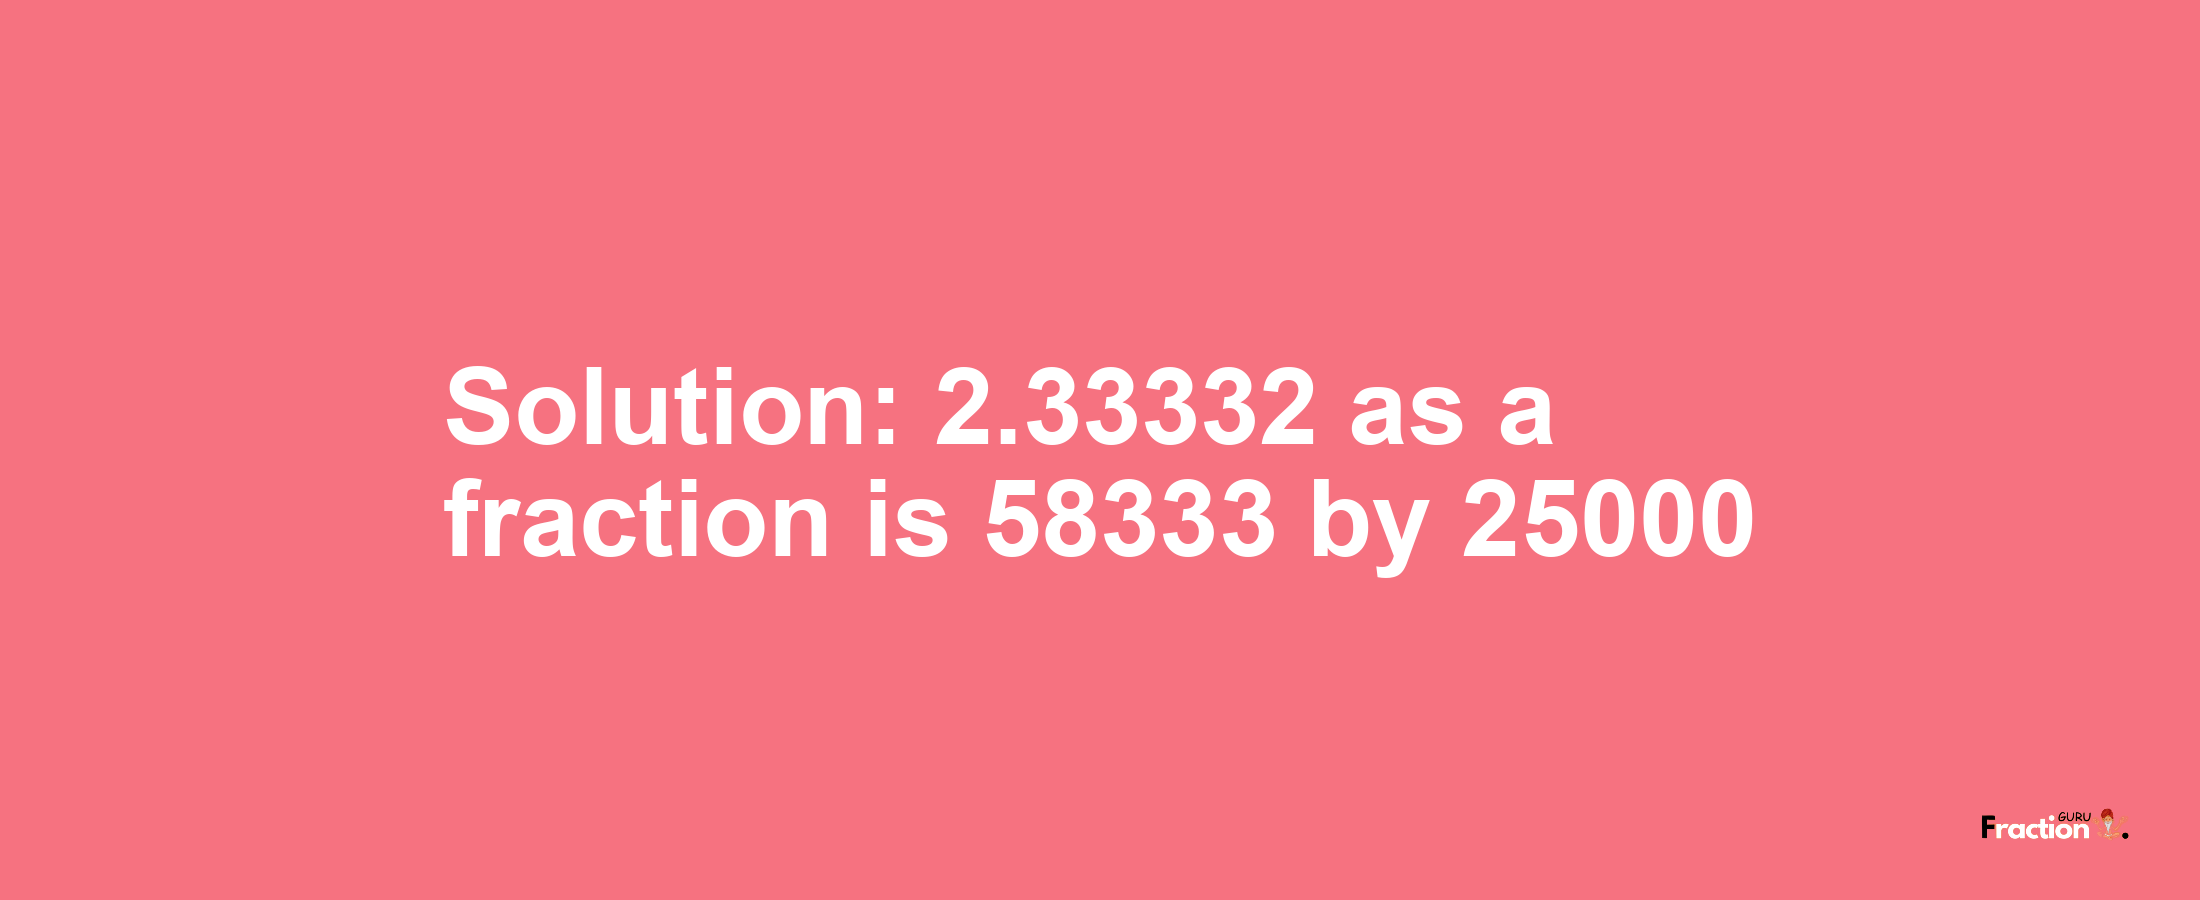 Solution:2.33332 as a fraction is 58333/25000